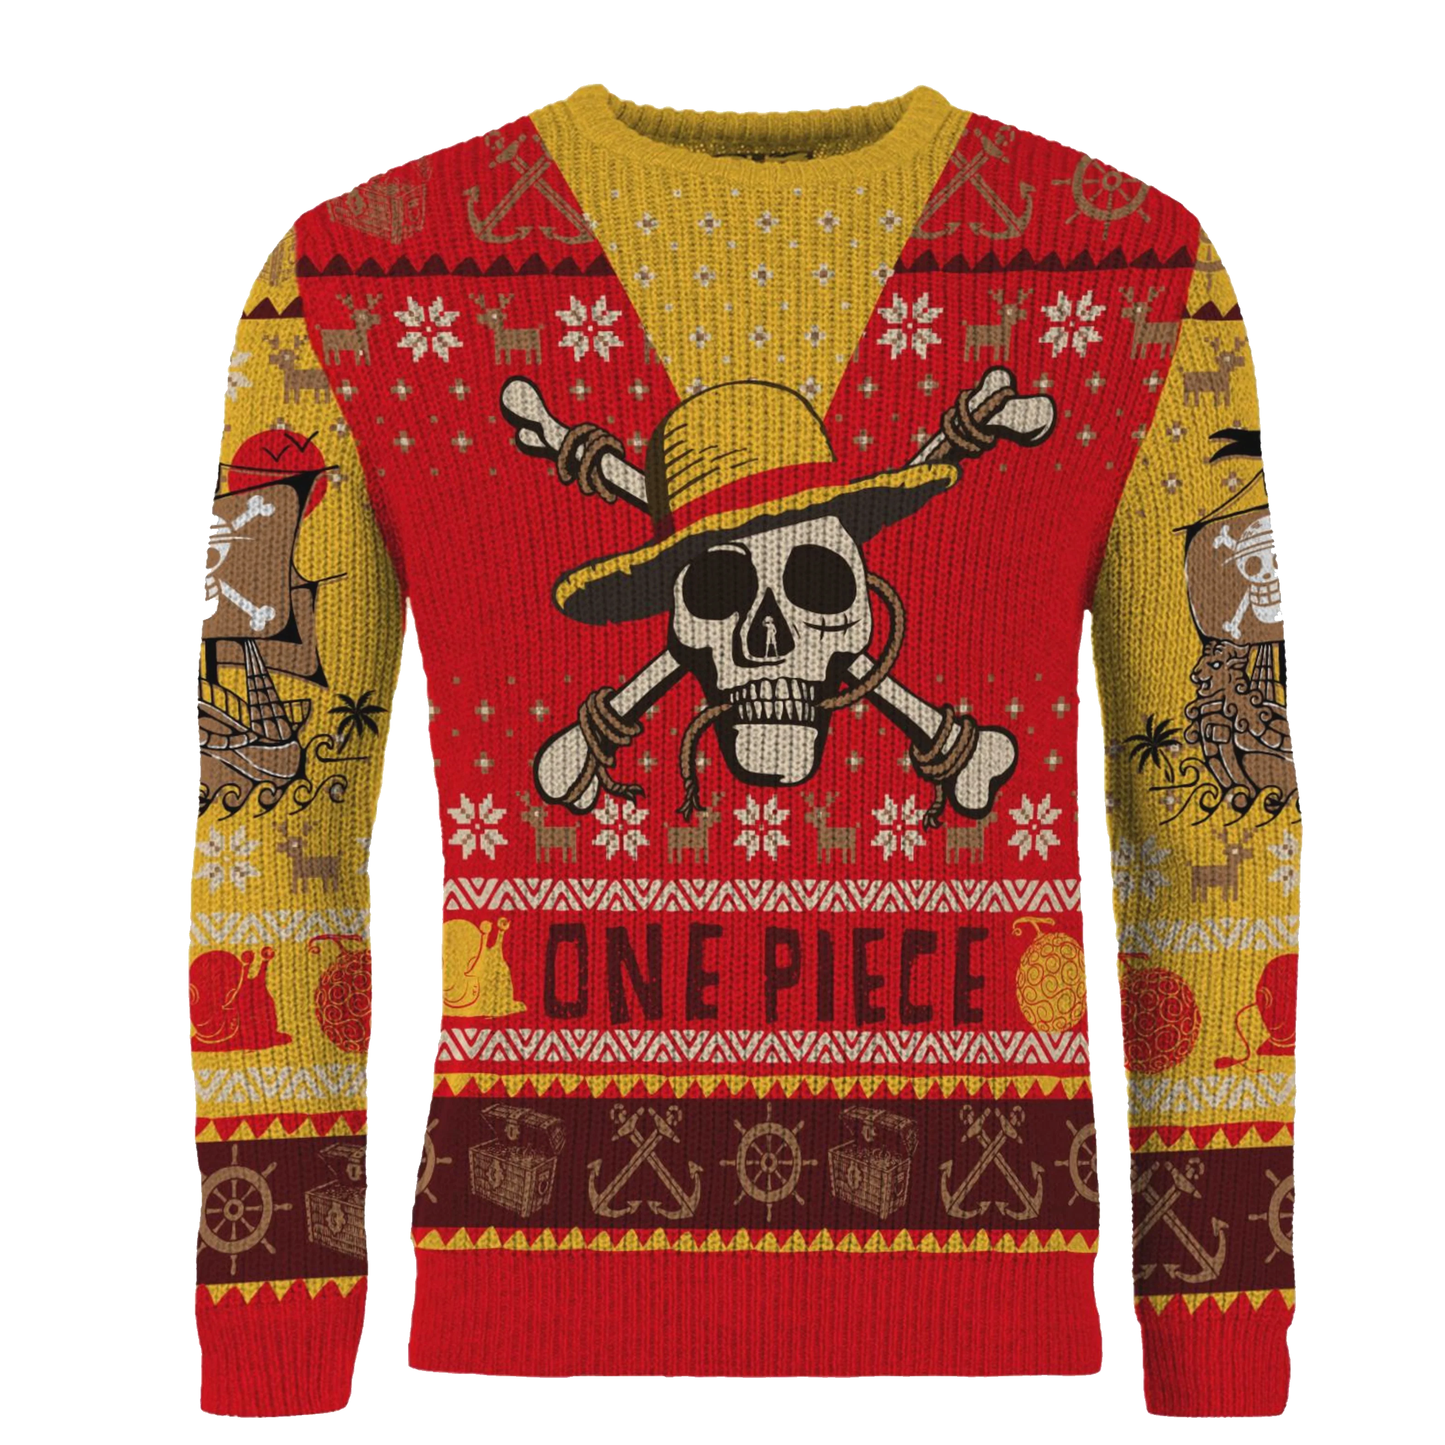 ONE PIECE - Christmas Jumper